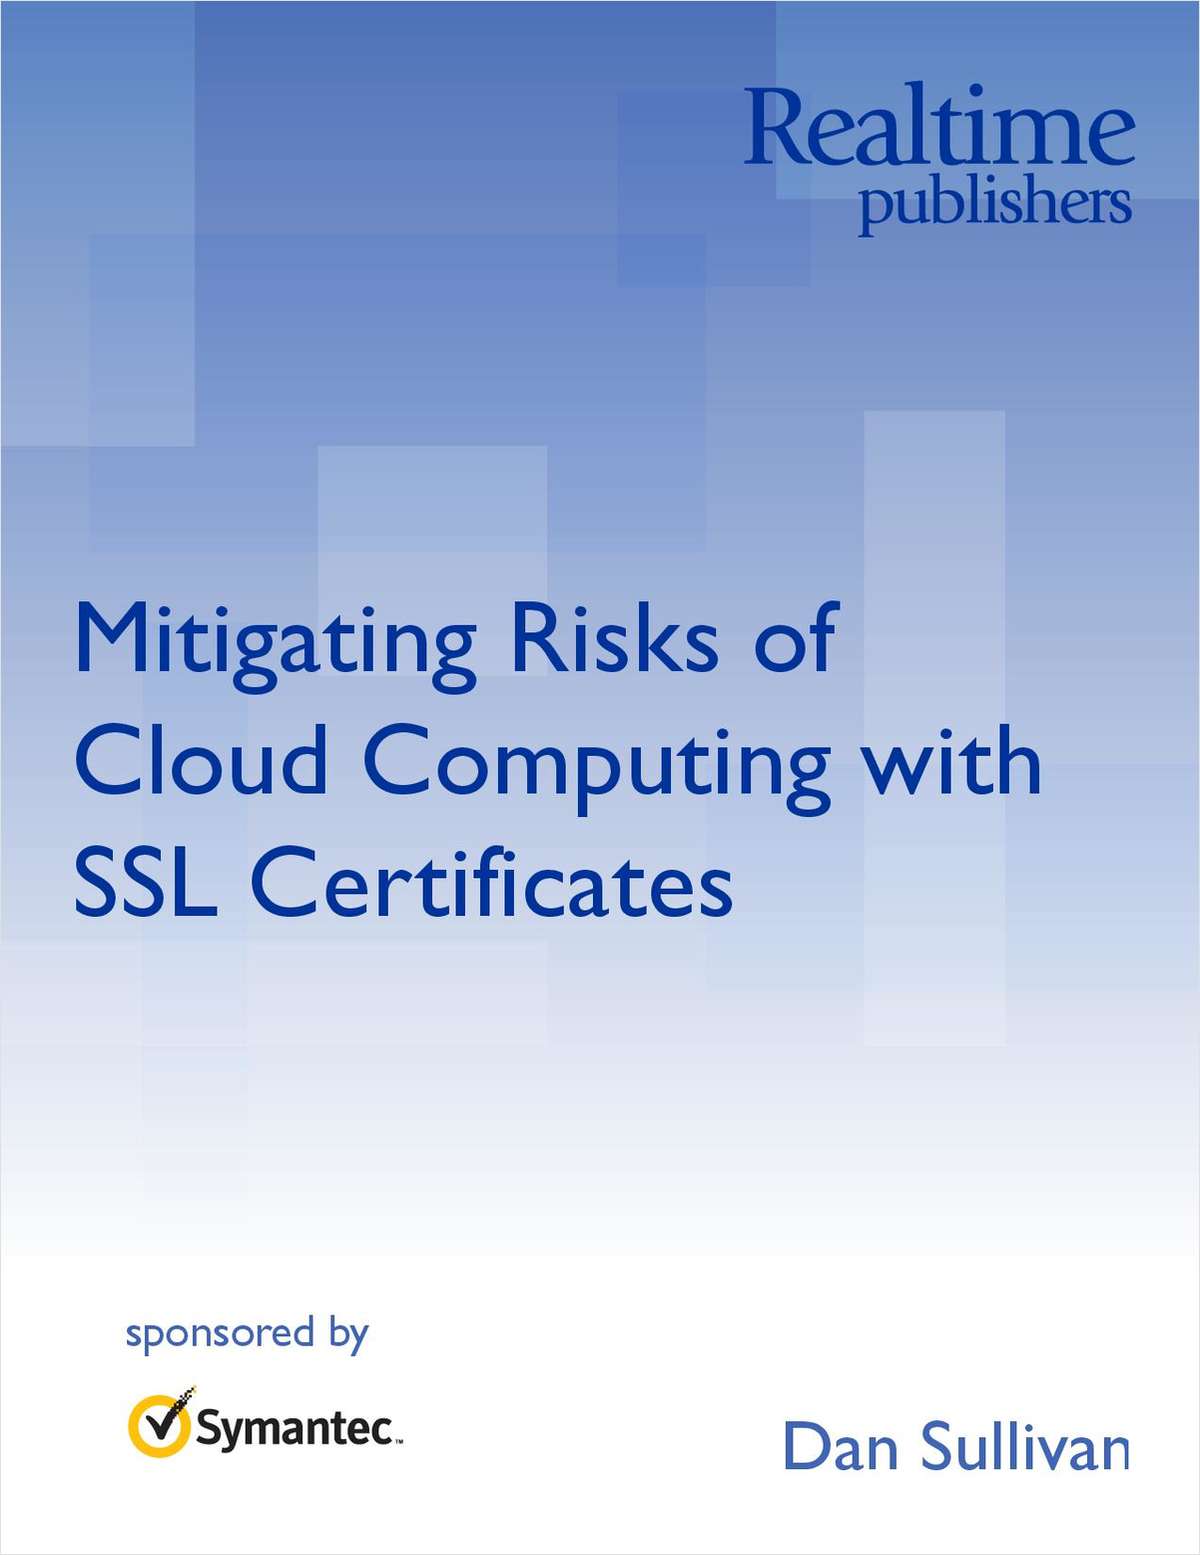 Mitigating Risks of Cloud Computing with SSL Certificates